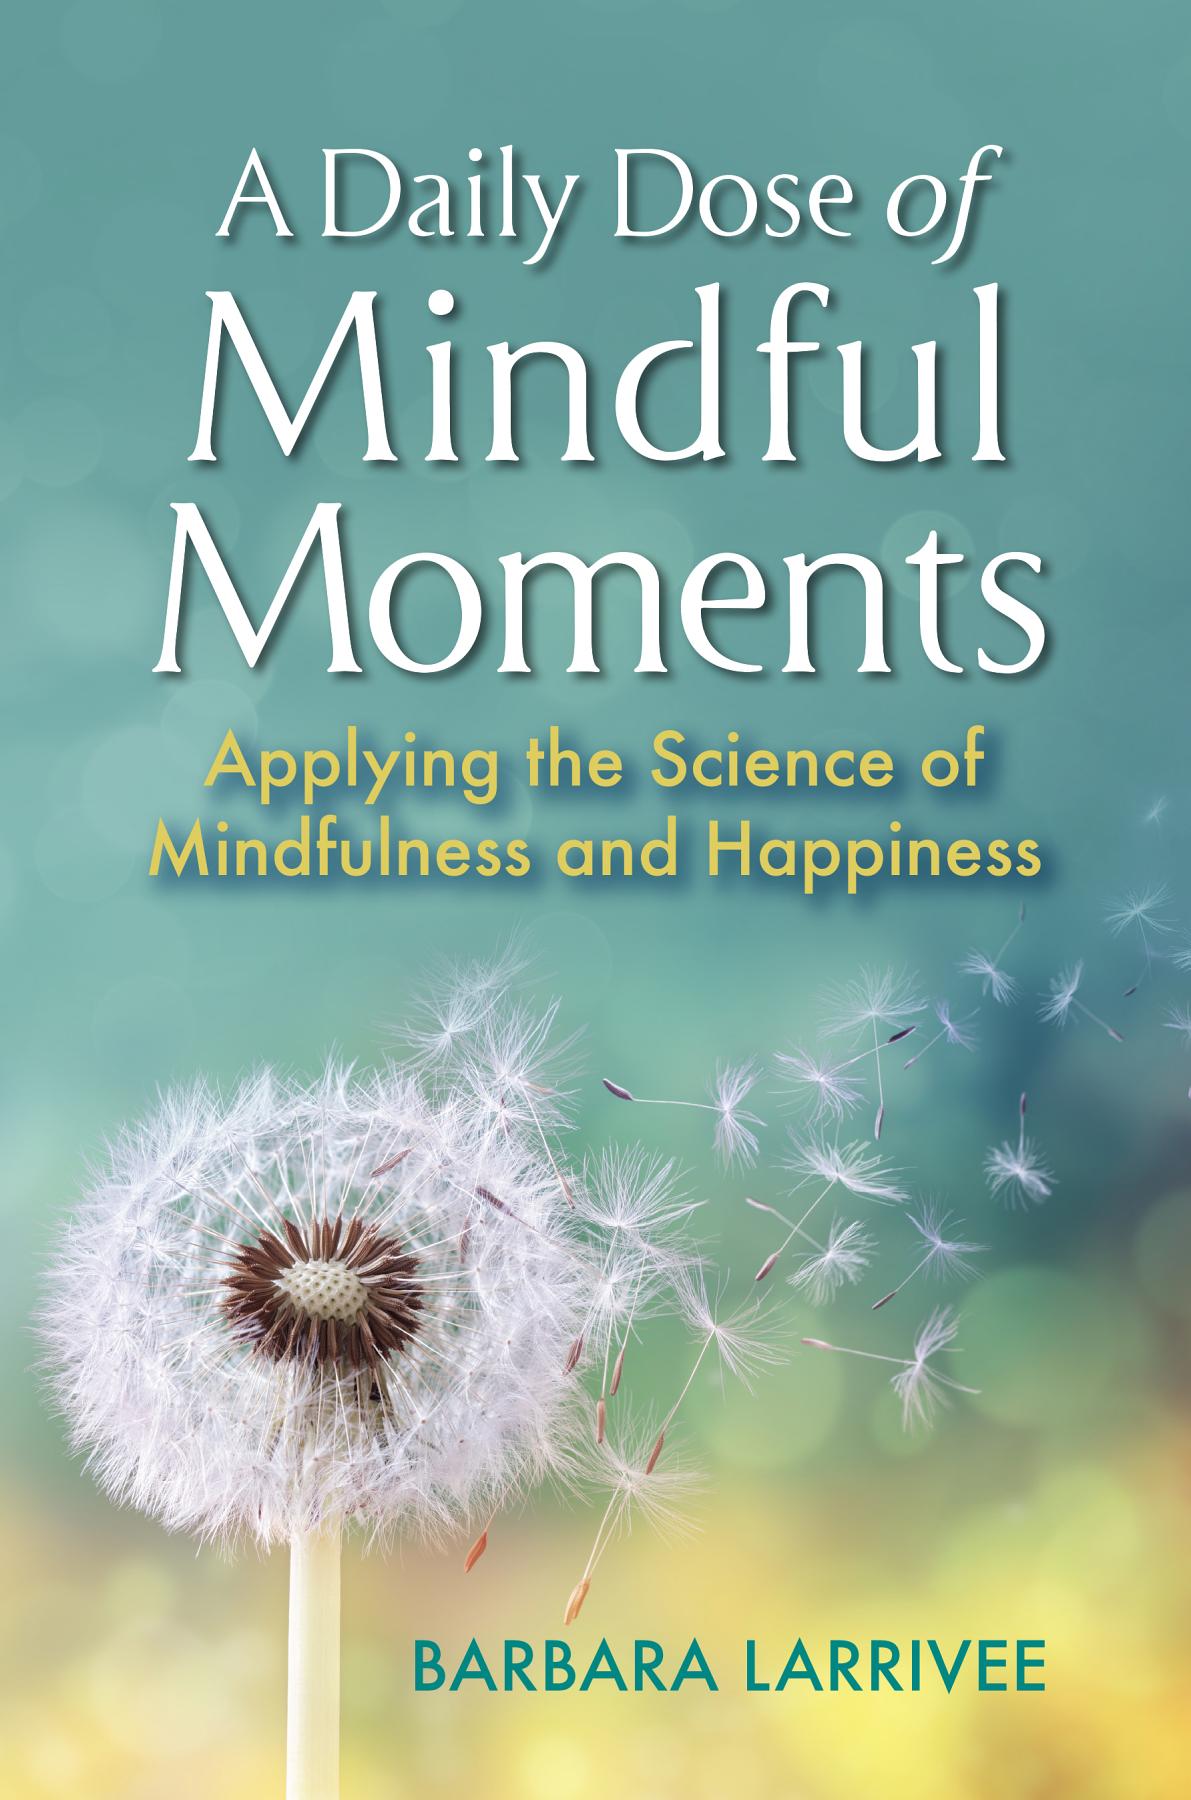 A Daily Dose of Mindful Moments